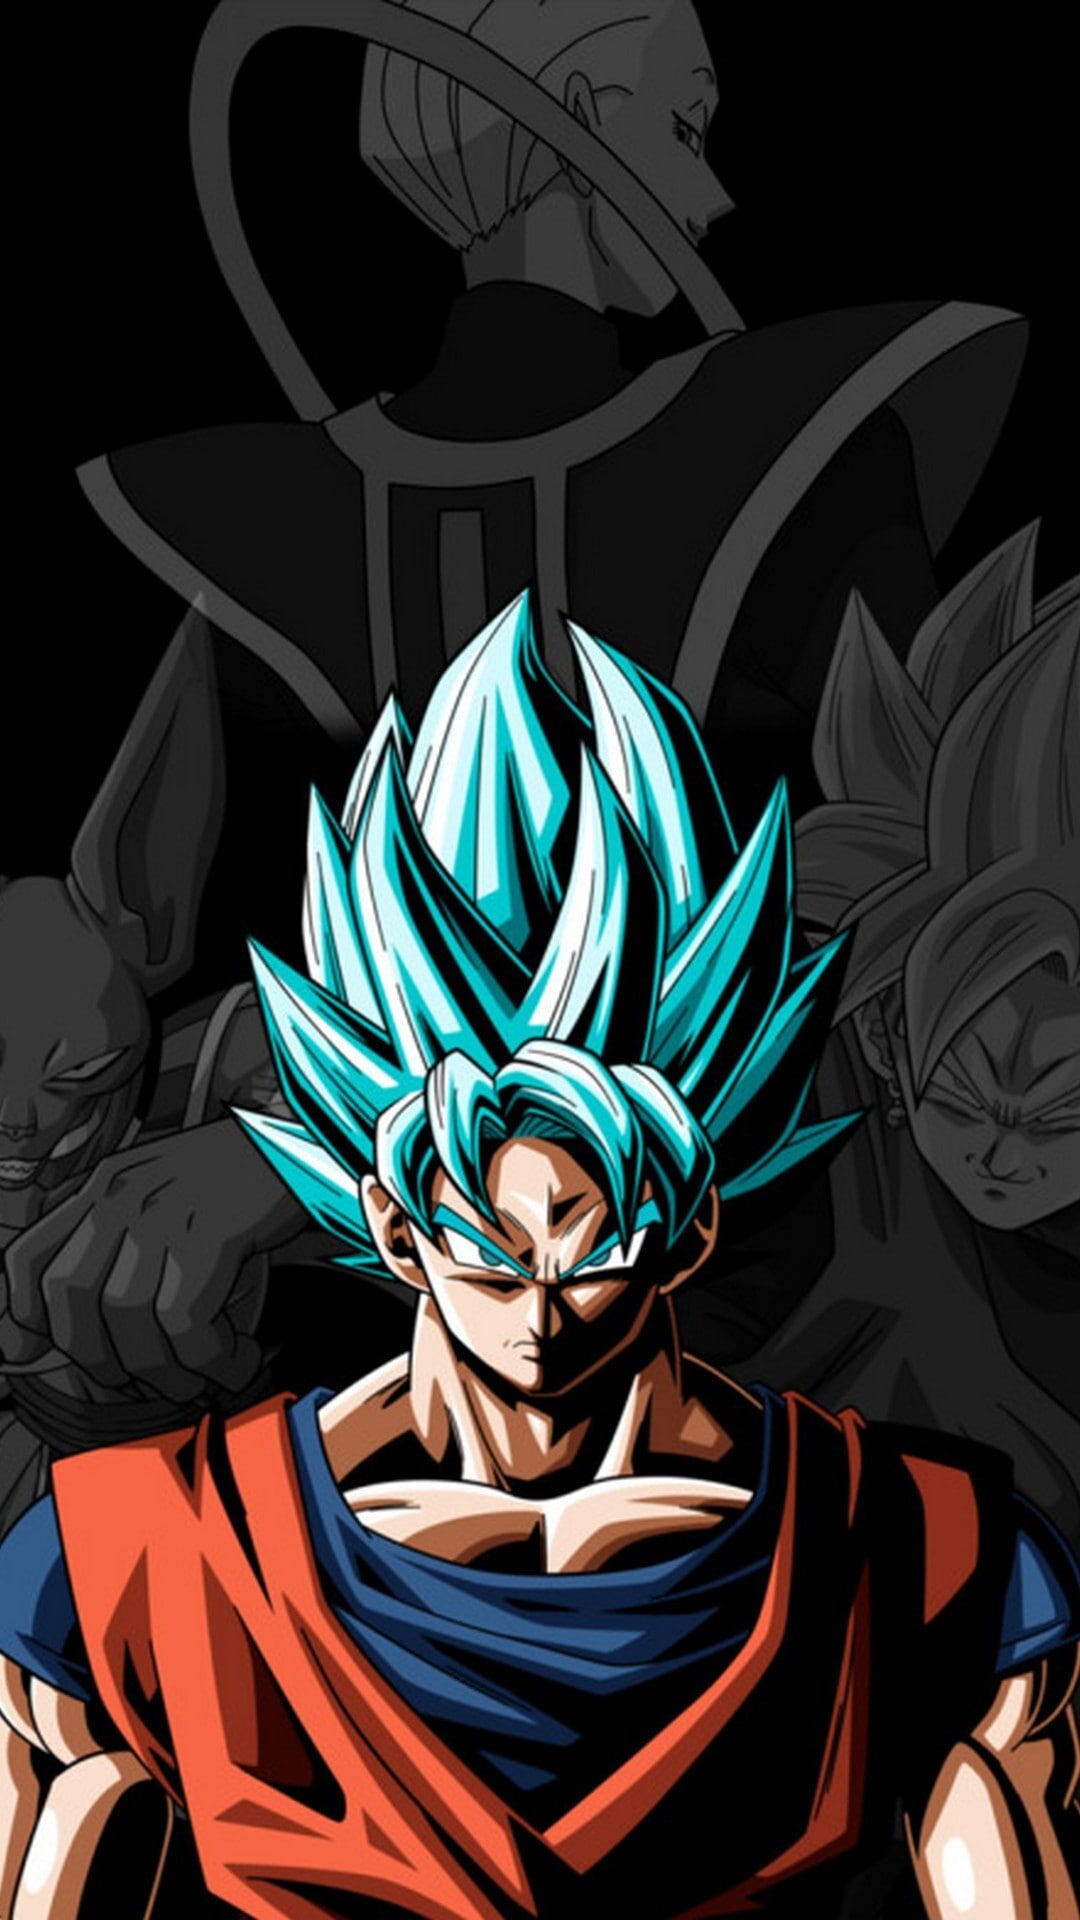 10 BEST ANIMATED WALLPAPERS FOR ANDROID. | Goku wallpaper, Goku black,  Dragon ball super wallpapers